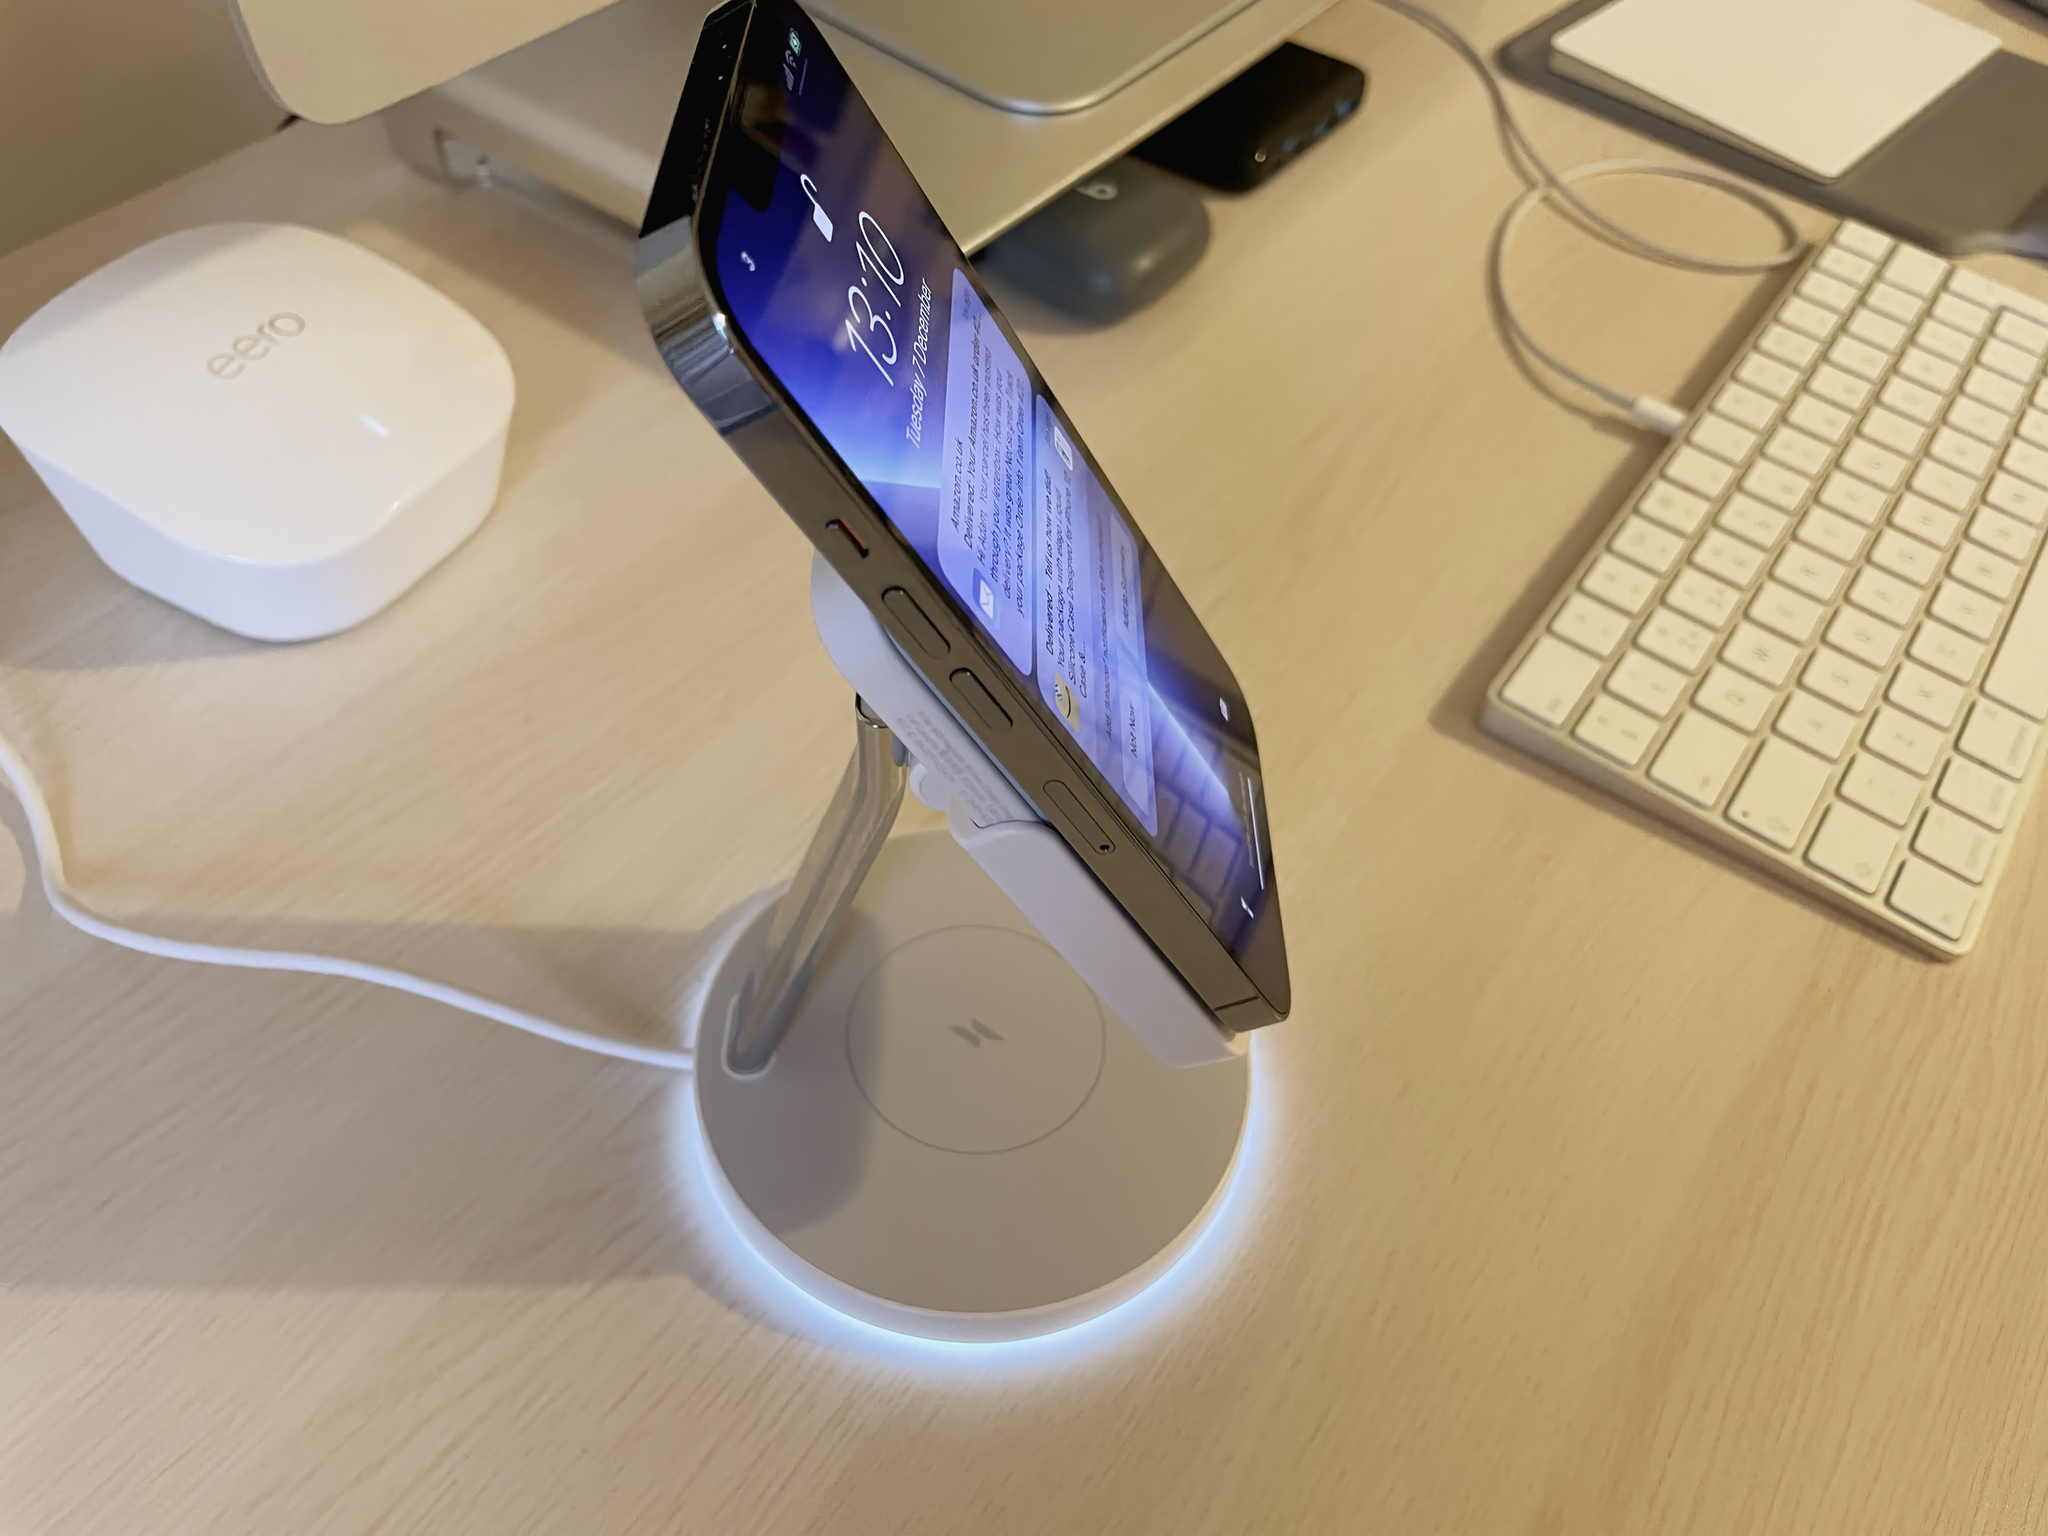 Anker MagGo 633 Magnetic Wireless Charger review: A 4-in-1 MagSafe